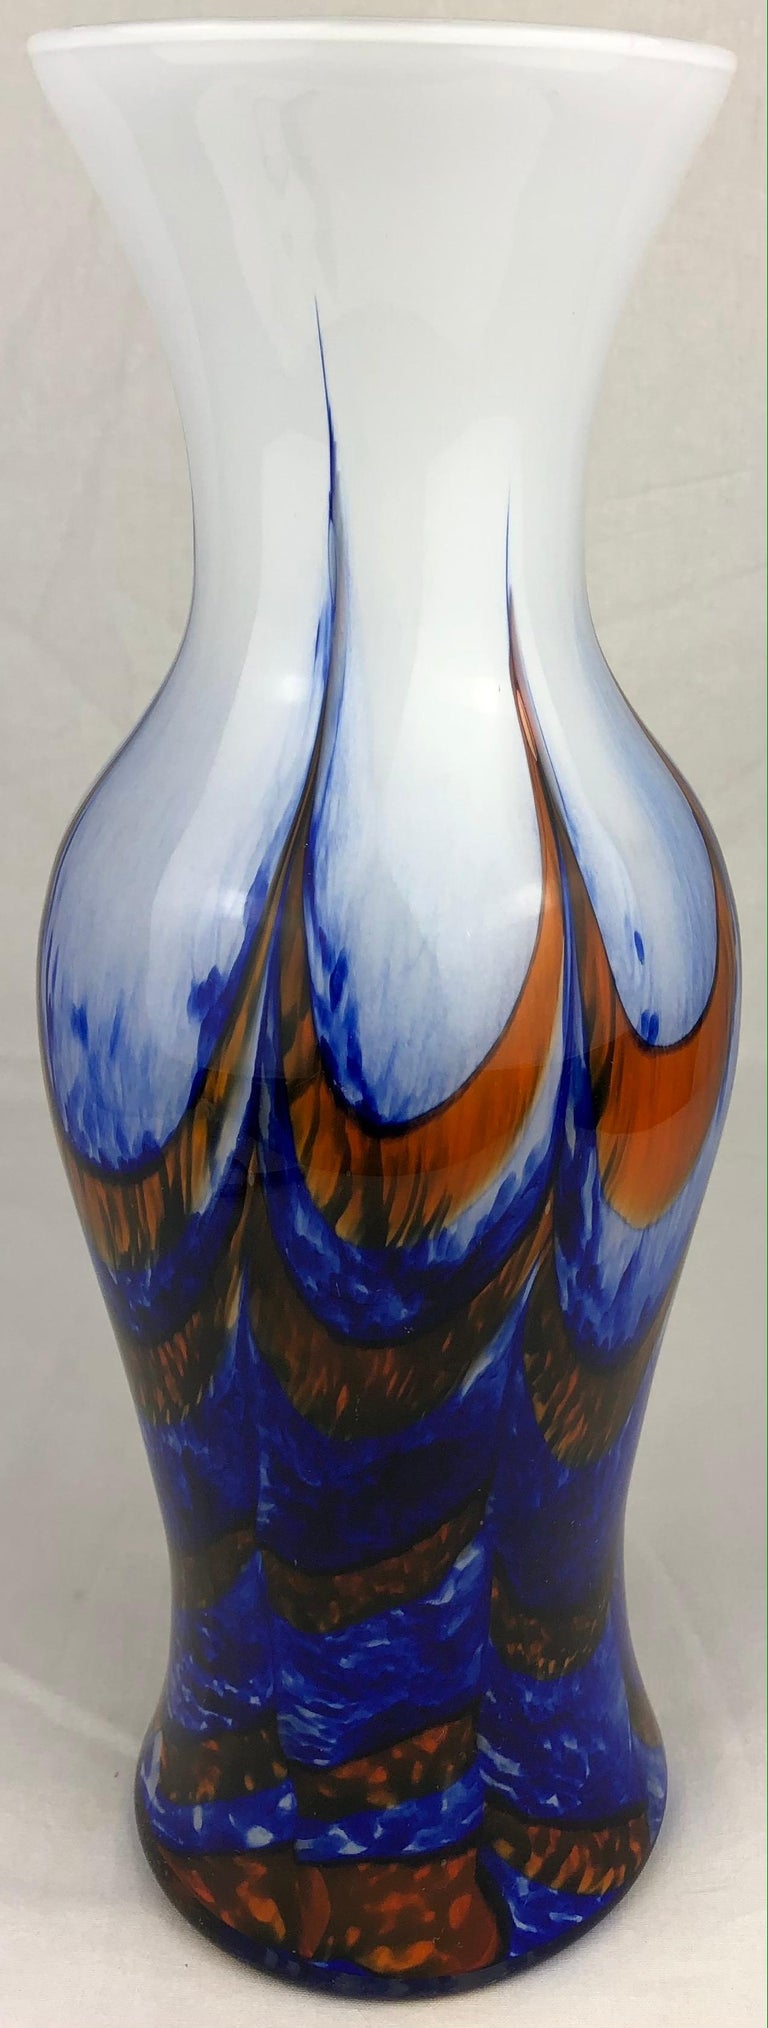 Tall French Midcentury Art Glass Vase Attributed to Schneider Glassworks For Sale 1